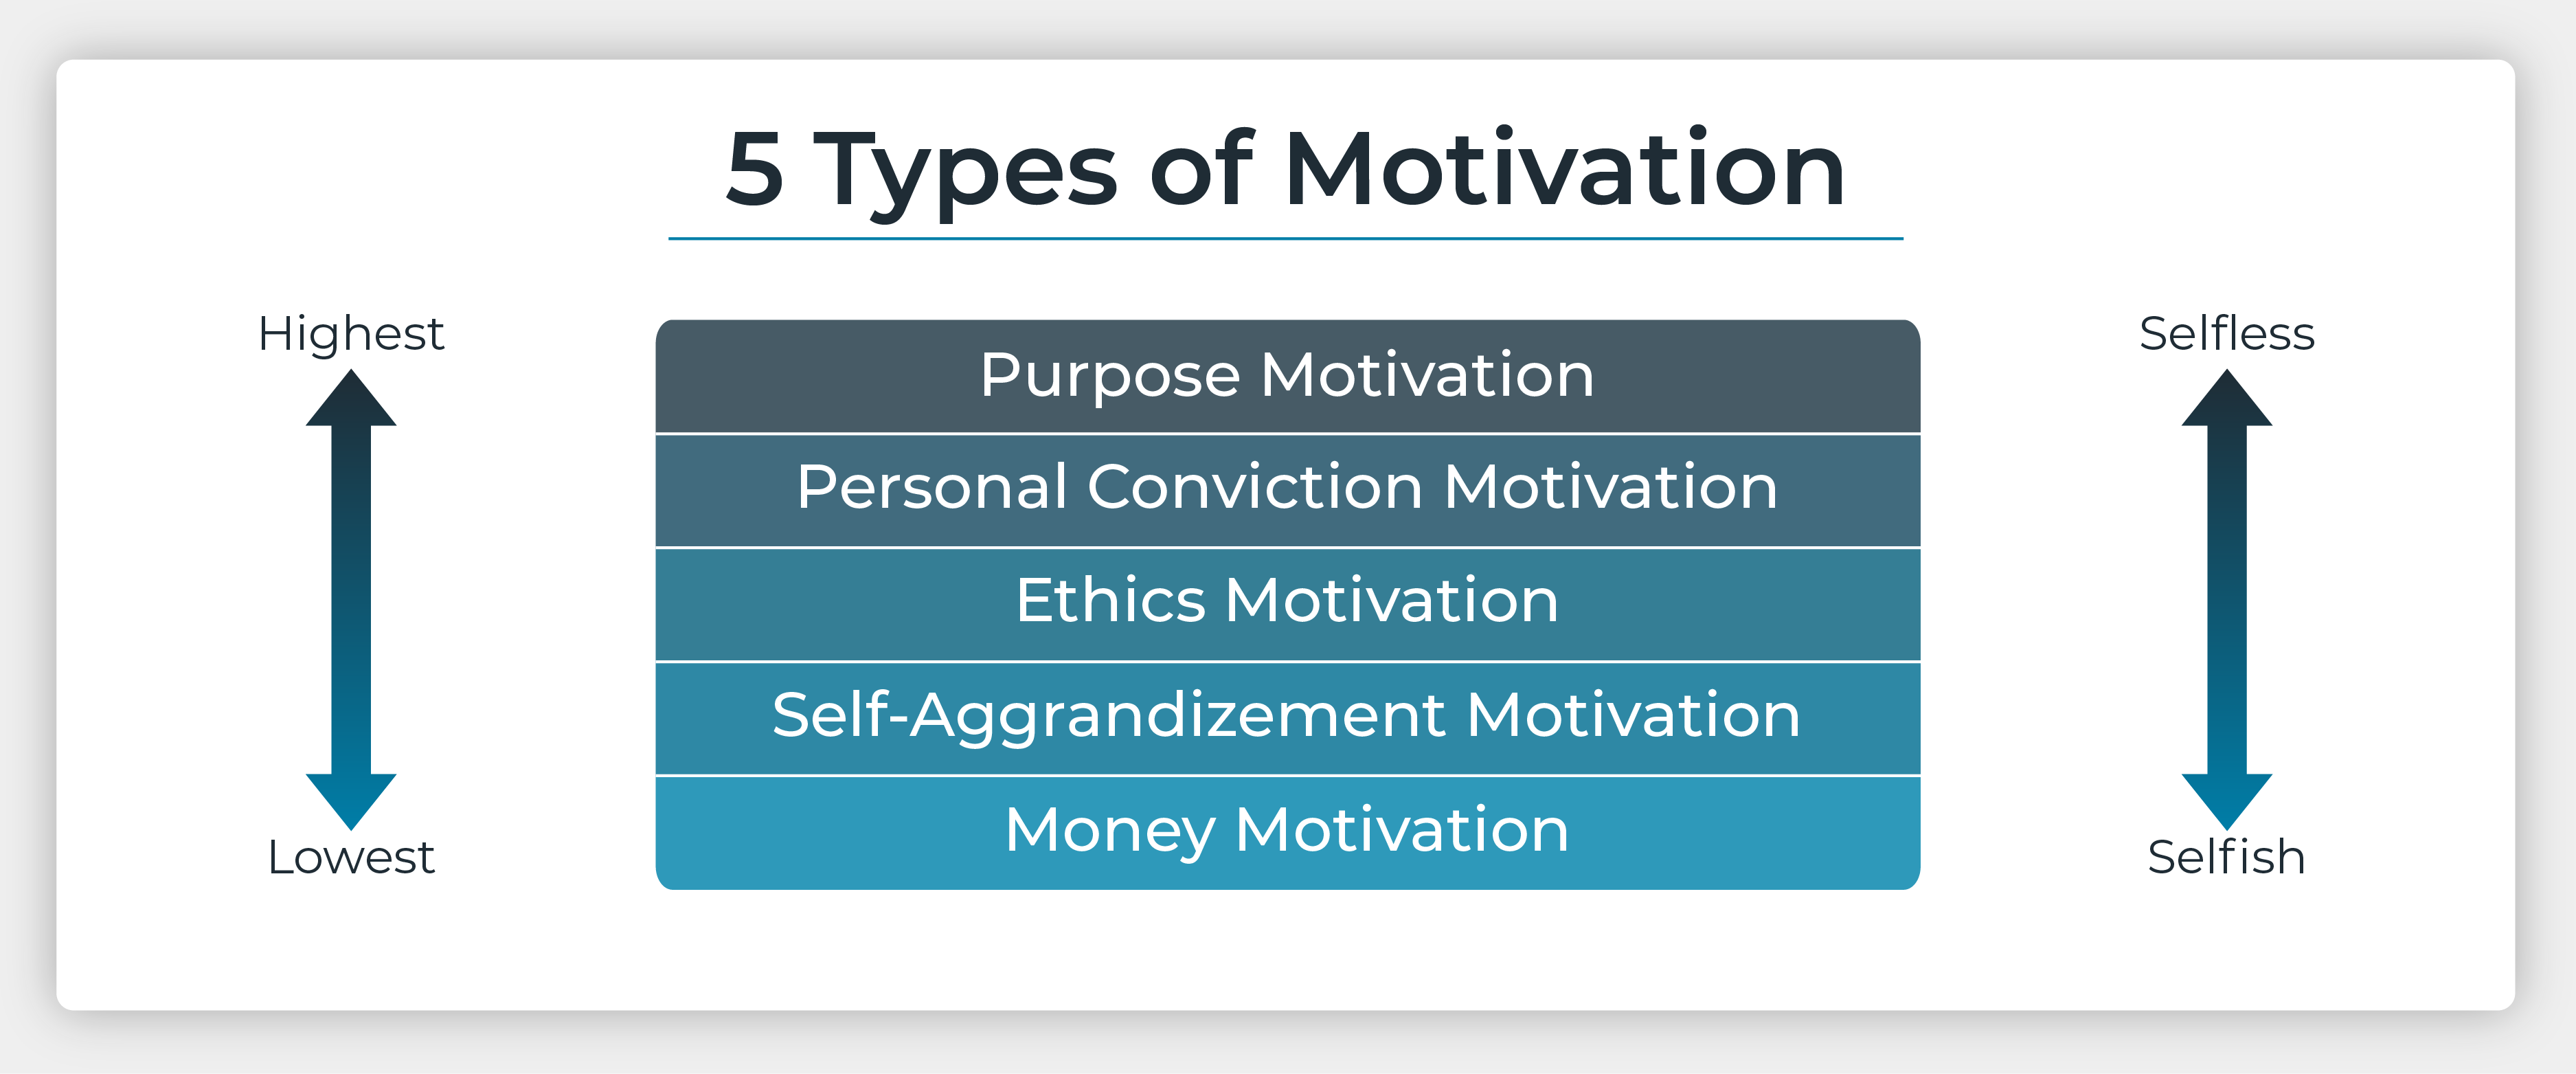 Discovering Your Purpose The Five Types of Motivation - DJD Blog_031224_Types of Motivation_V2